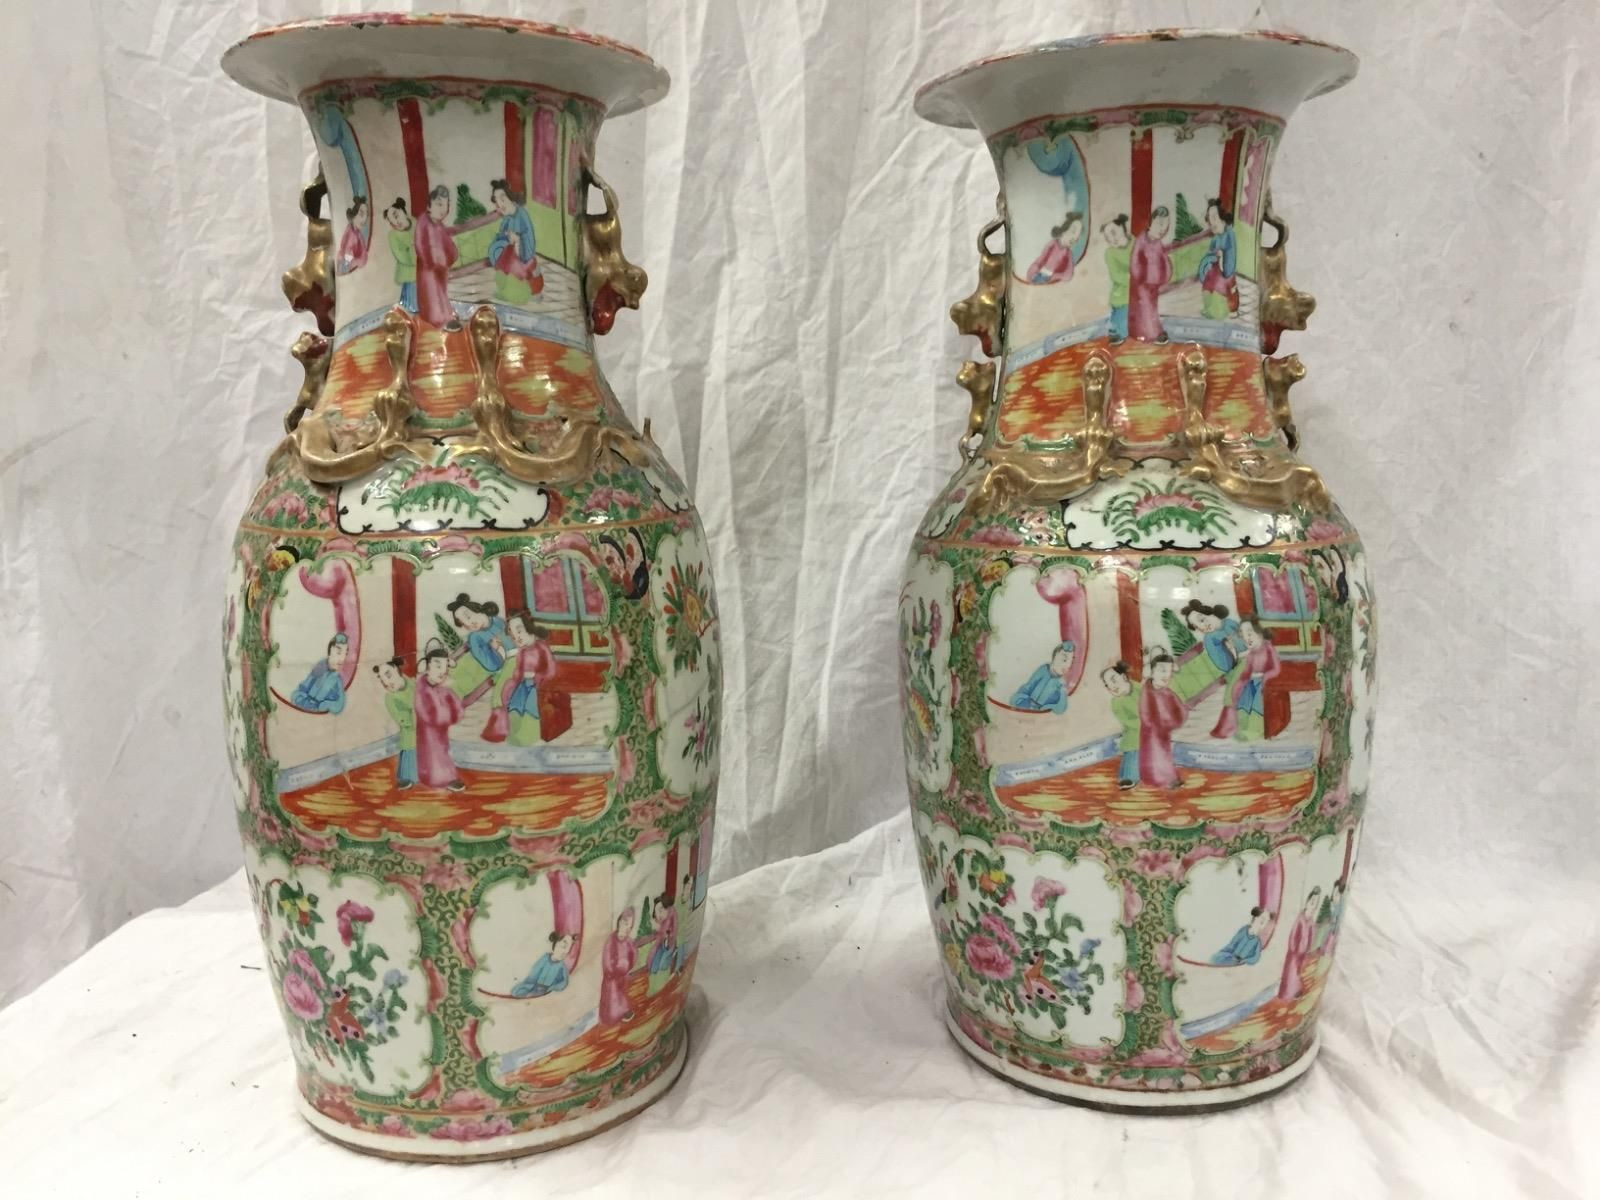 16 Perfect Antique Chinese Vases for Sale 2022 free download antique chinese vases for sale of 22 large chinese vases for the floor the weekly world pertaining to 22 large chinese vases for the floor